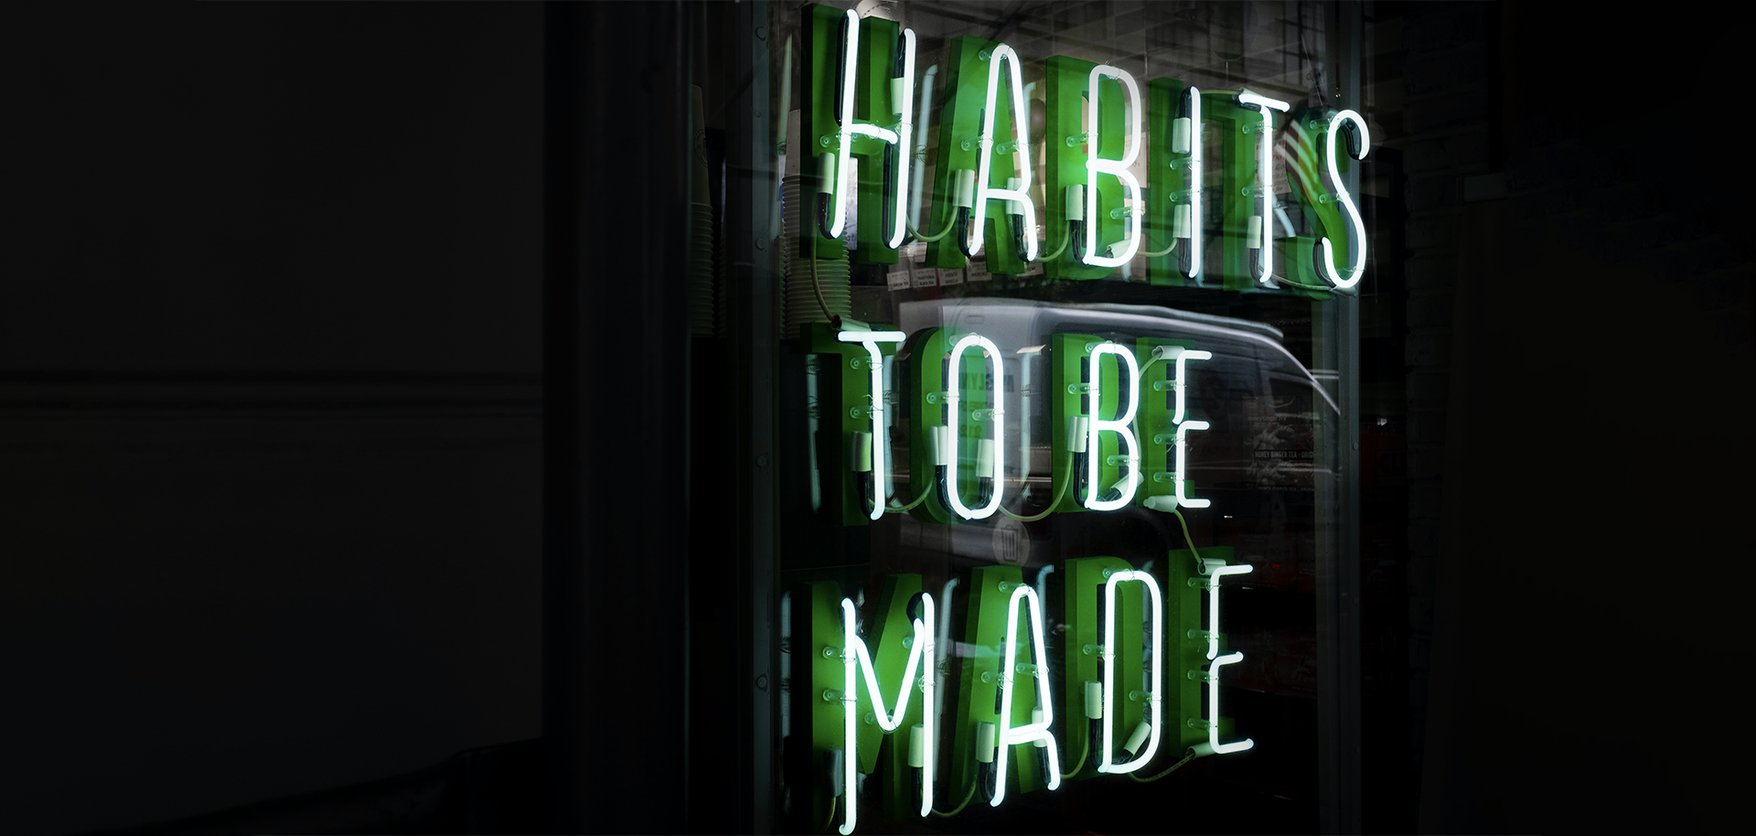 Habits to be made neon sign